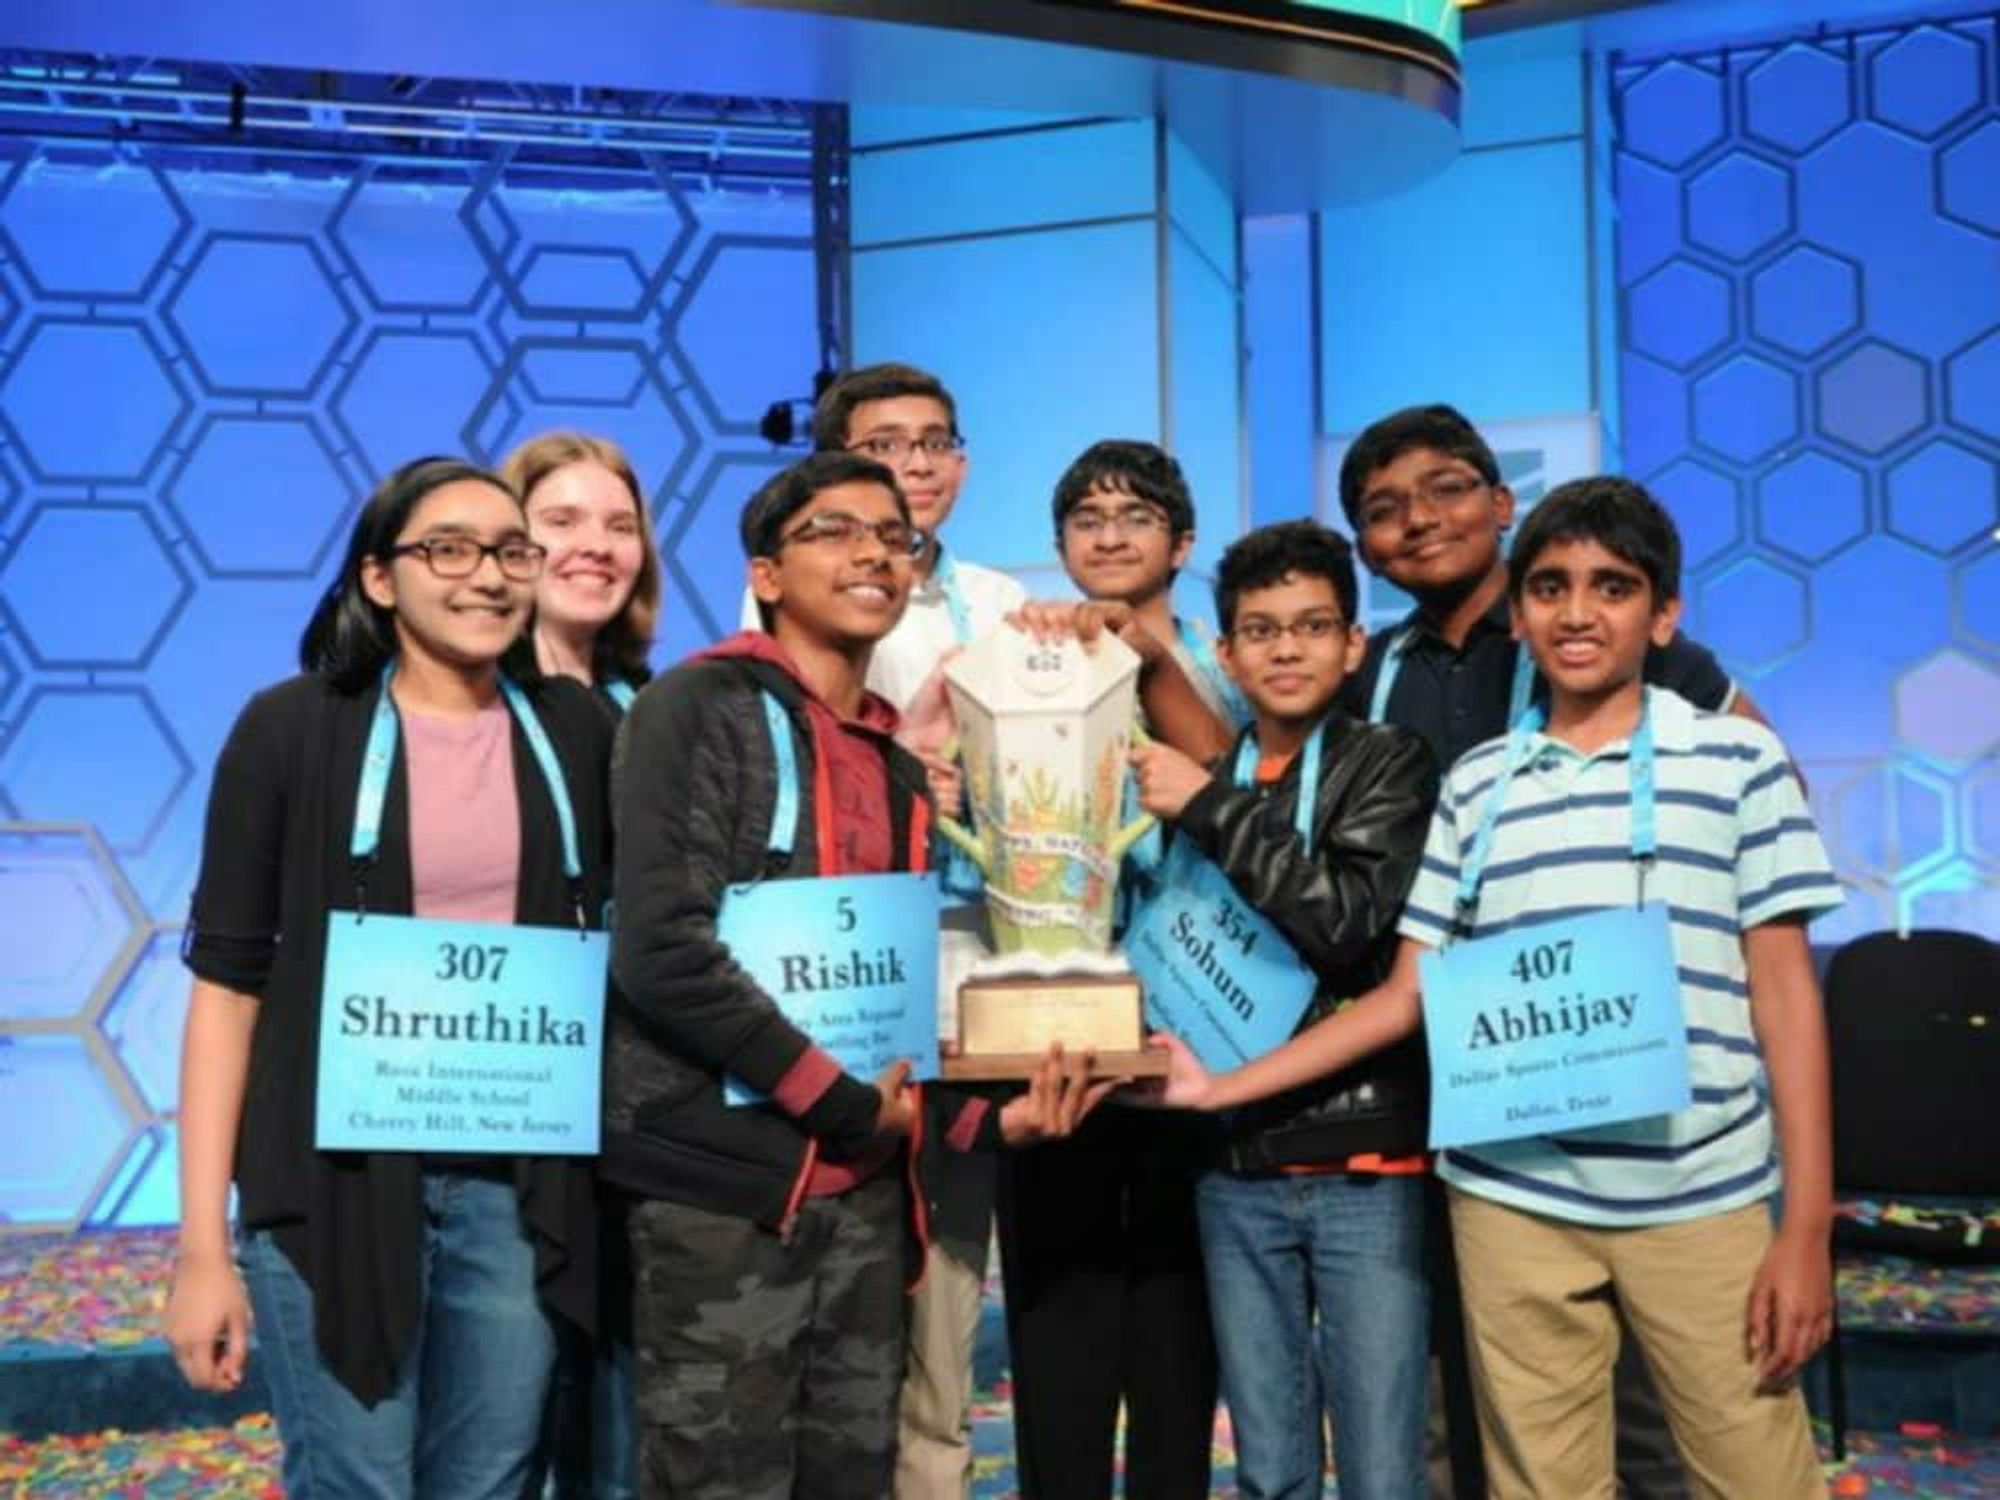 8 co-champions of the 2019 Scripps National Spelling Bee